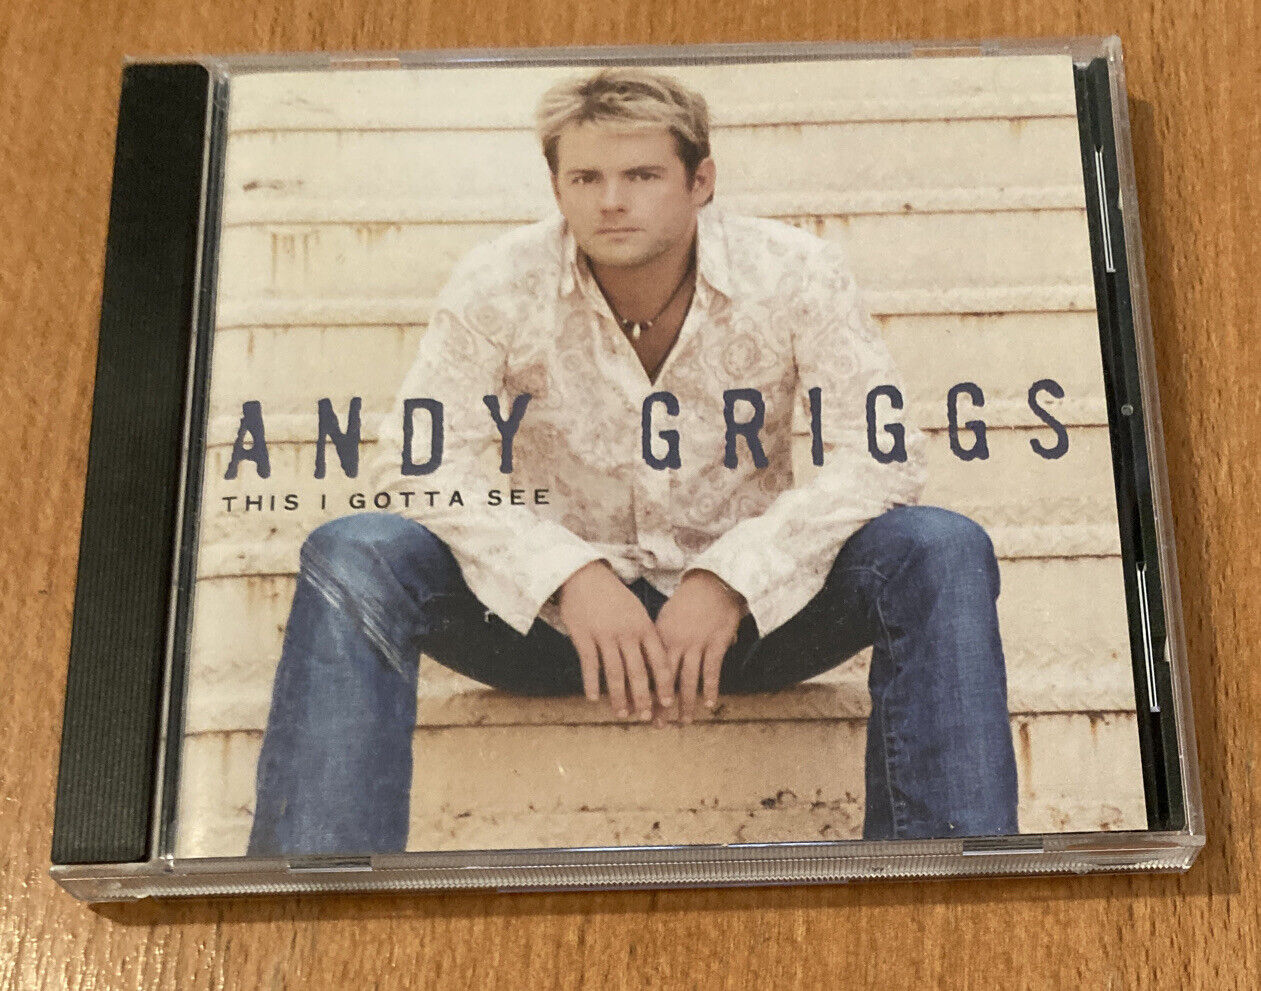 This I Gotta See by Andy Griggs (CD, 2004, RCA)